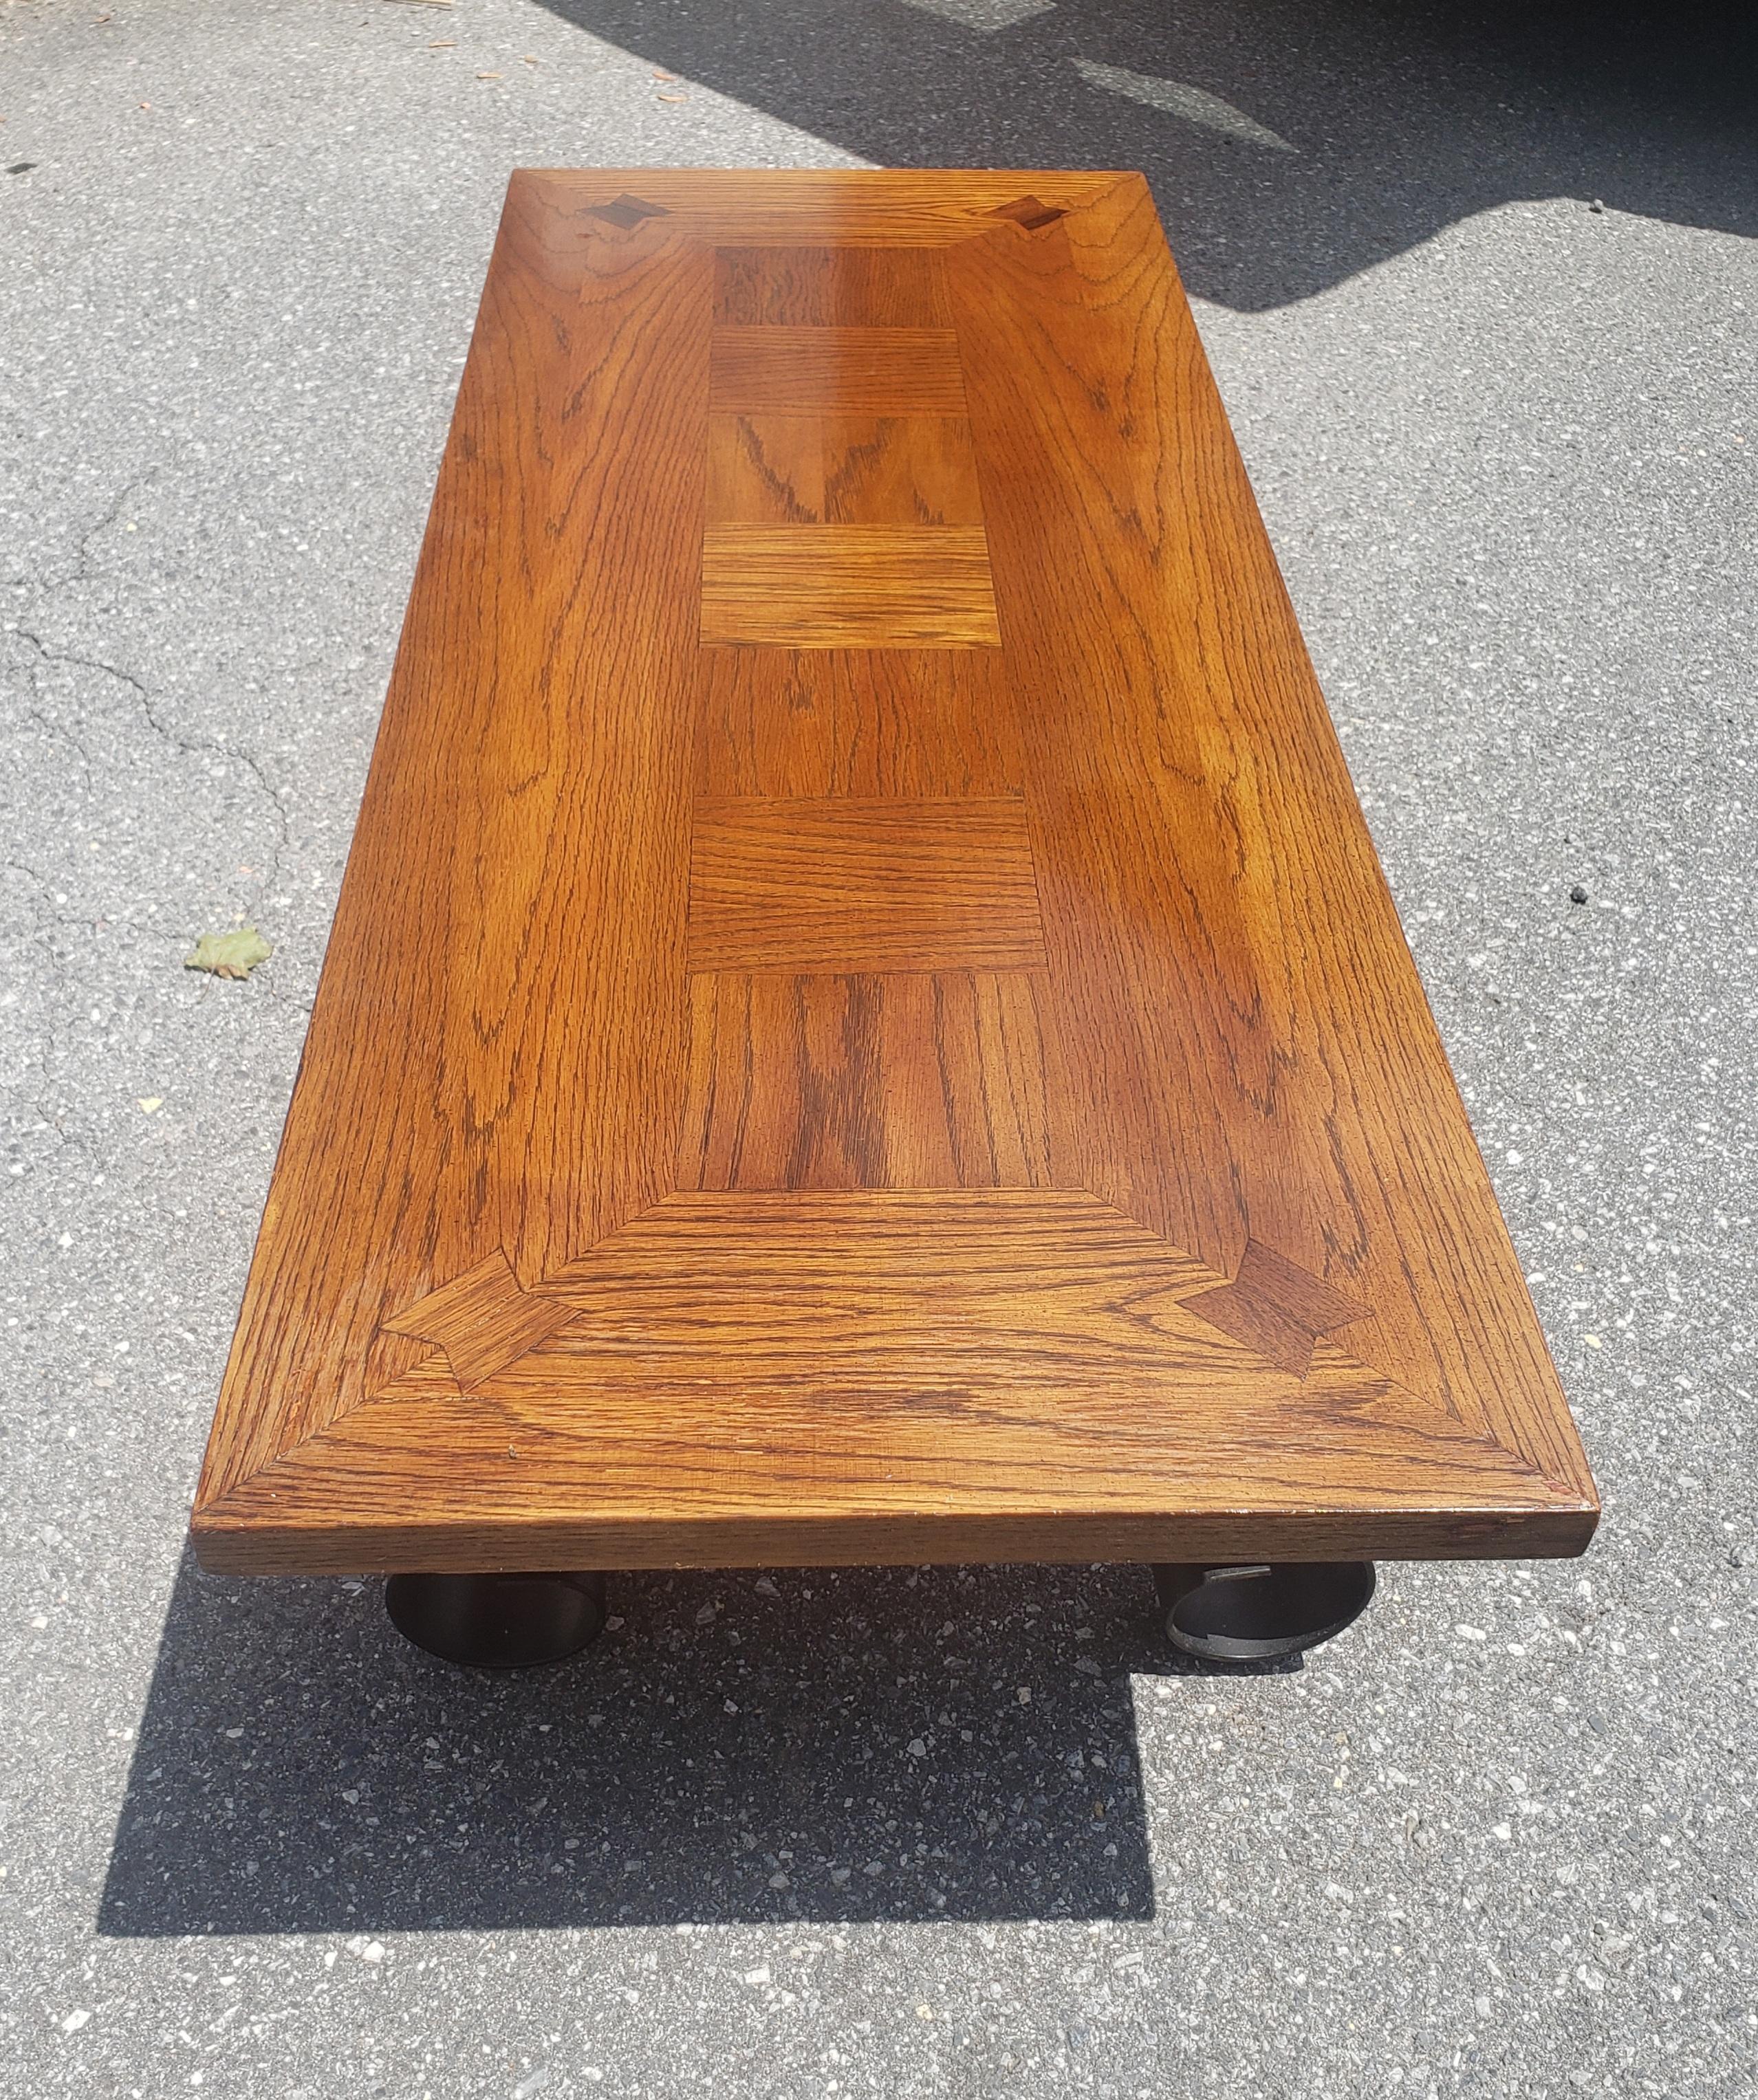 A 1960s Lane Furniture Oak Parquetry Coffee Table with scroll forged iron base painted black.
Measurs 56